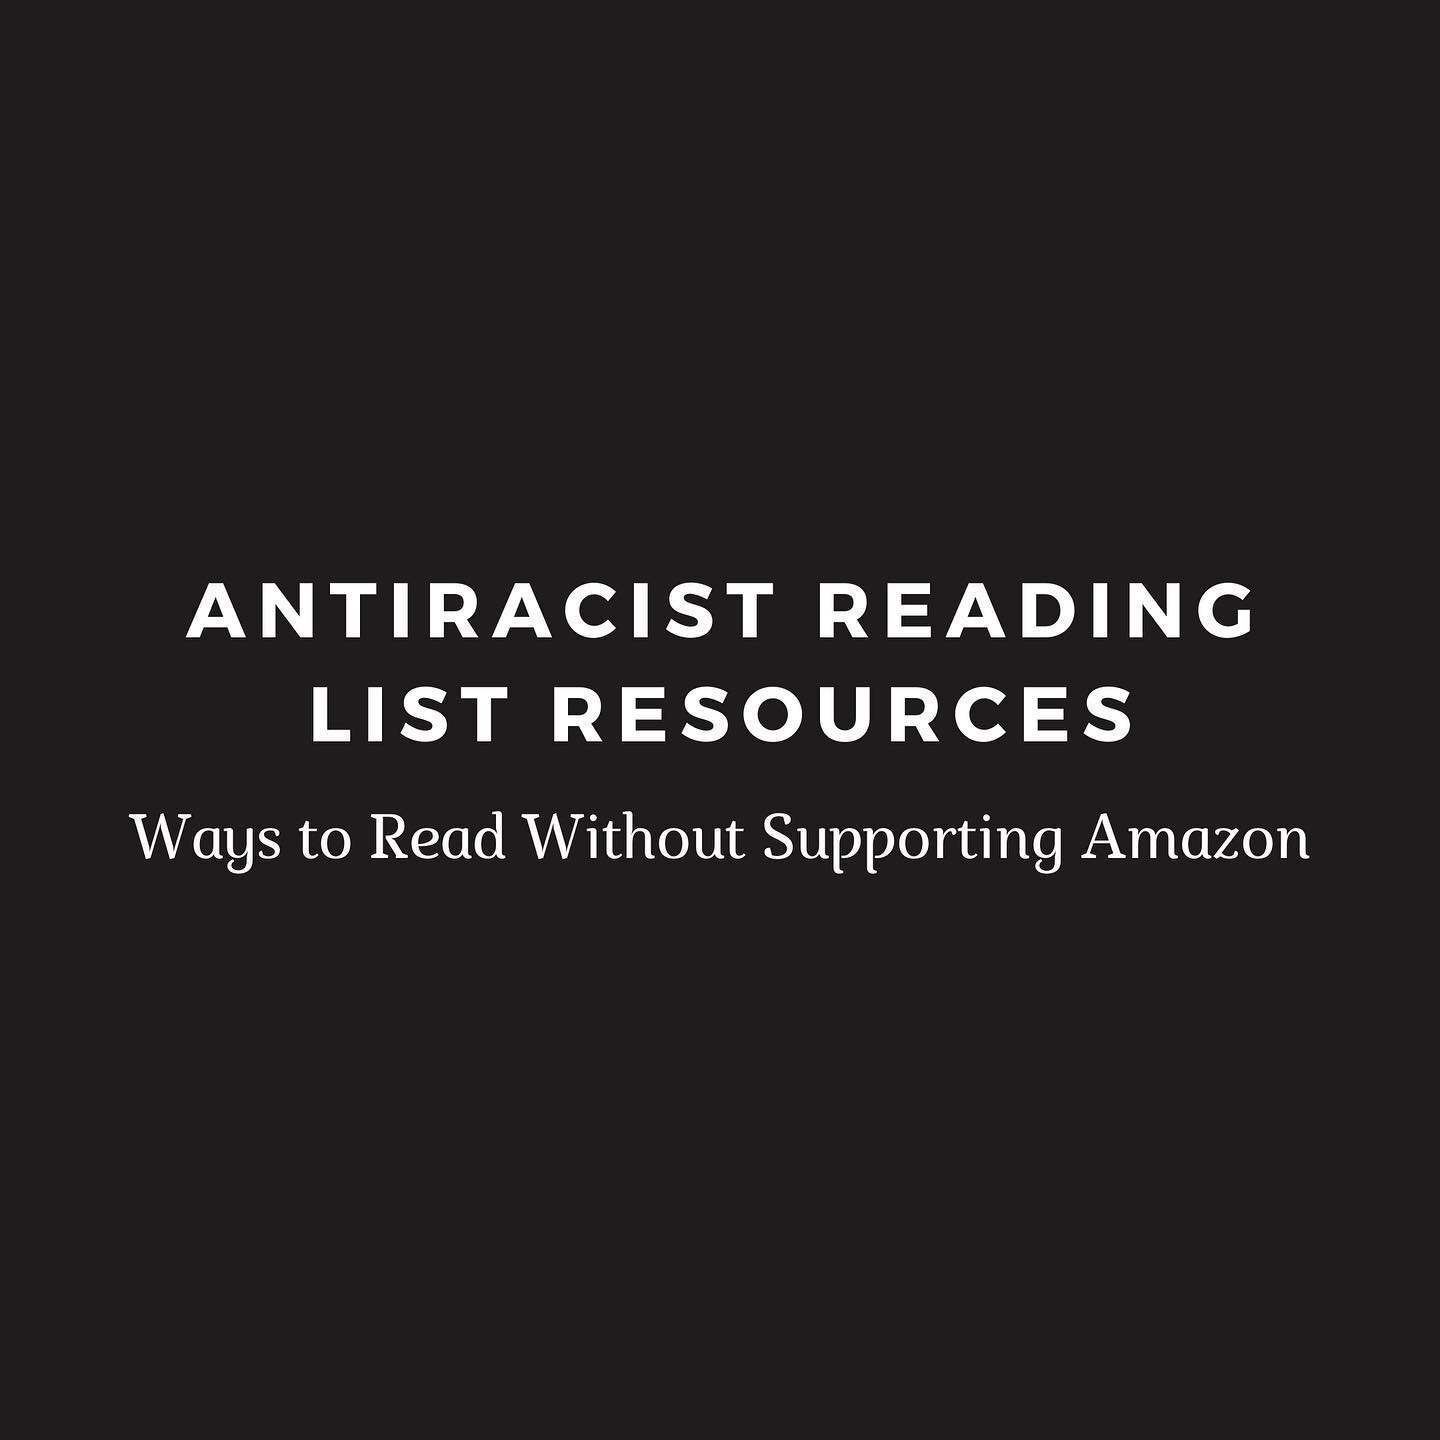 Hey y&rsquo;all! With all of the antiracist reading lists going around, I wanted to share some ways I&rsquo;ve been reading/purchasing books in order to avoid using Amazon, as well as other resources I&rsquo;ve found. Most options are extremely cost 